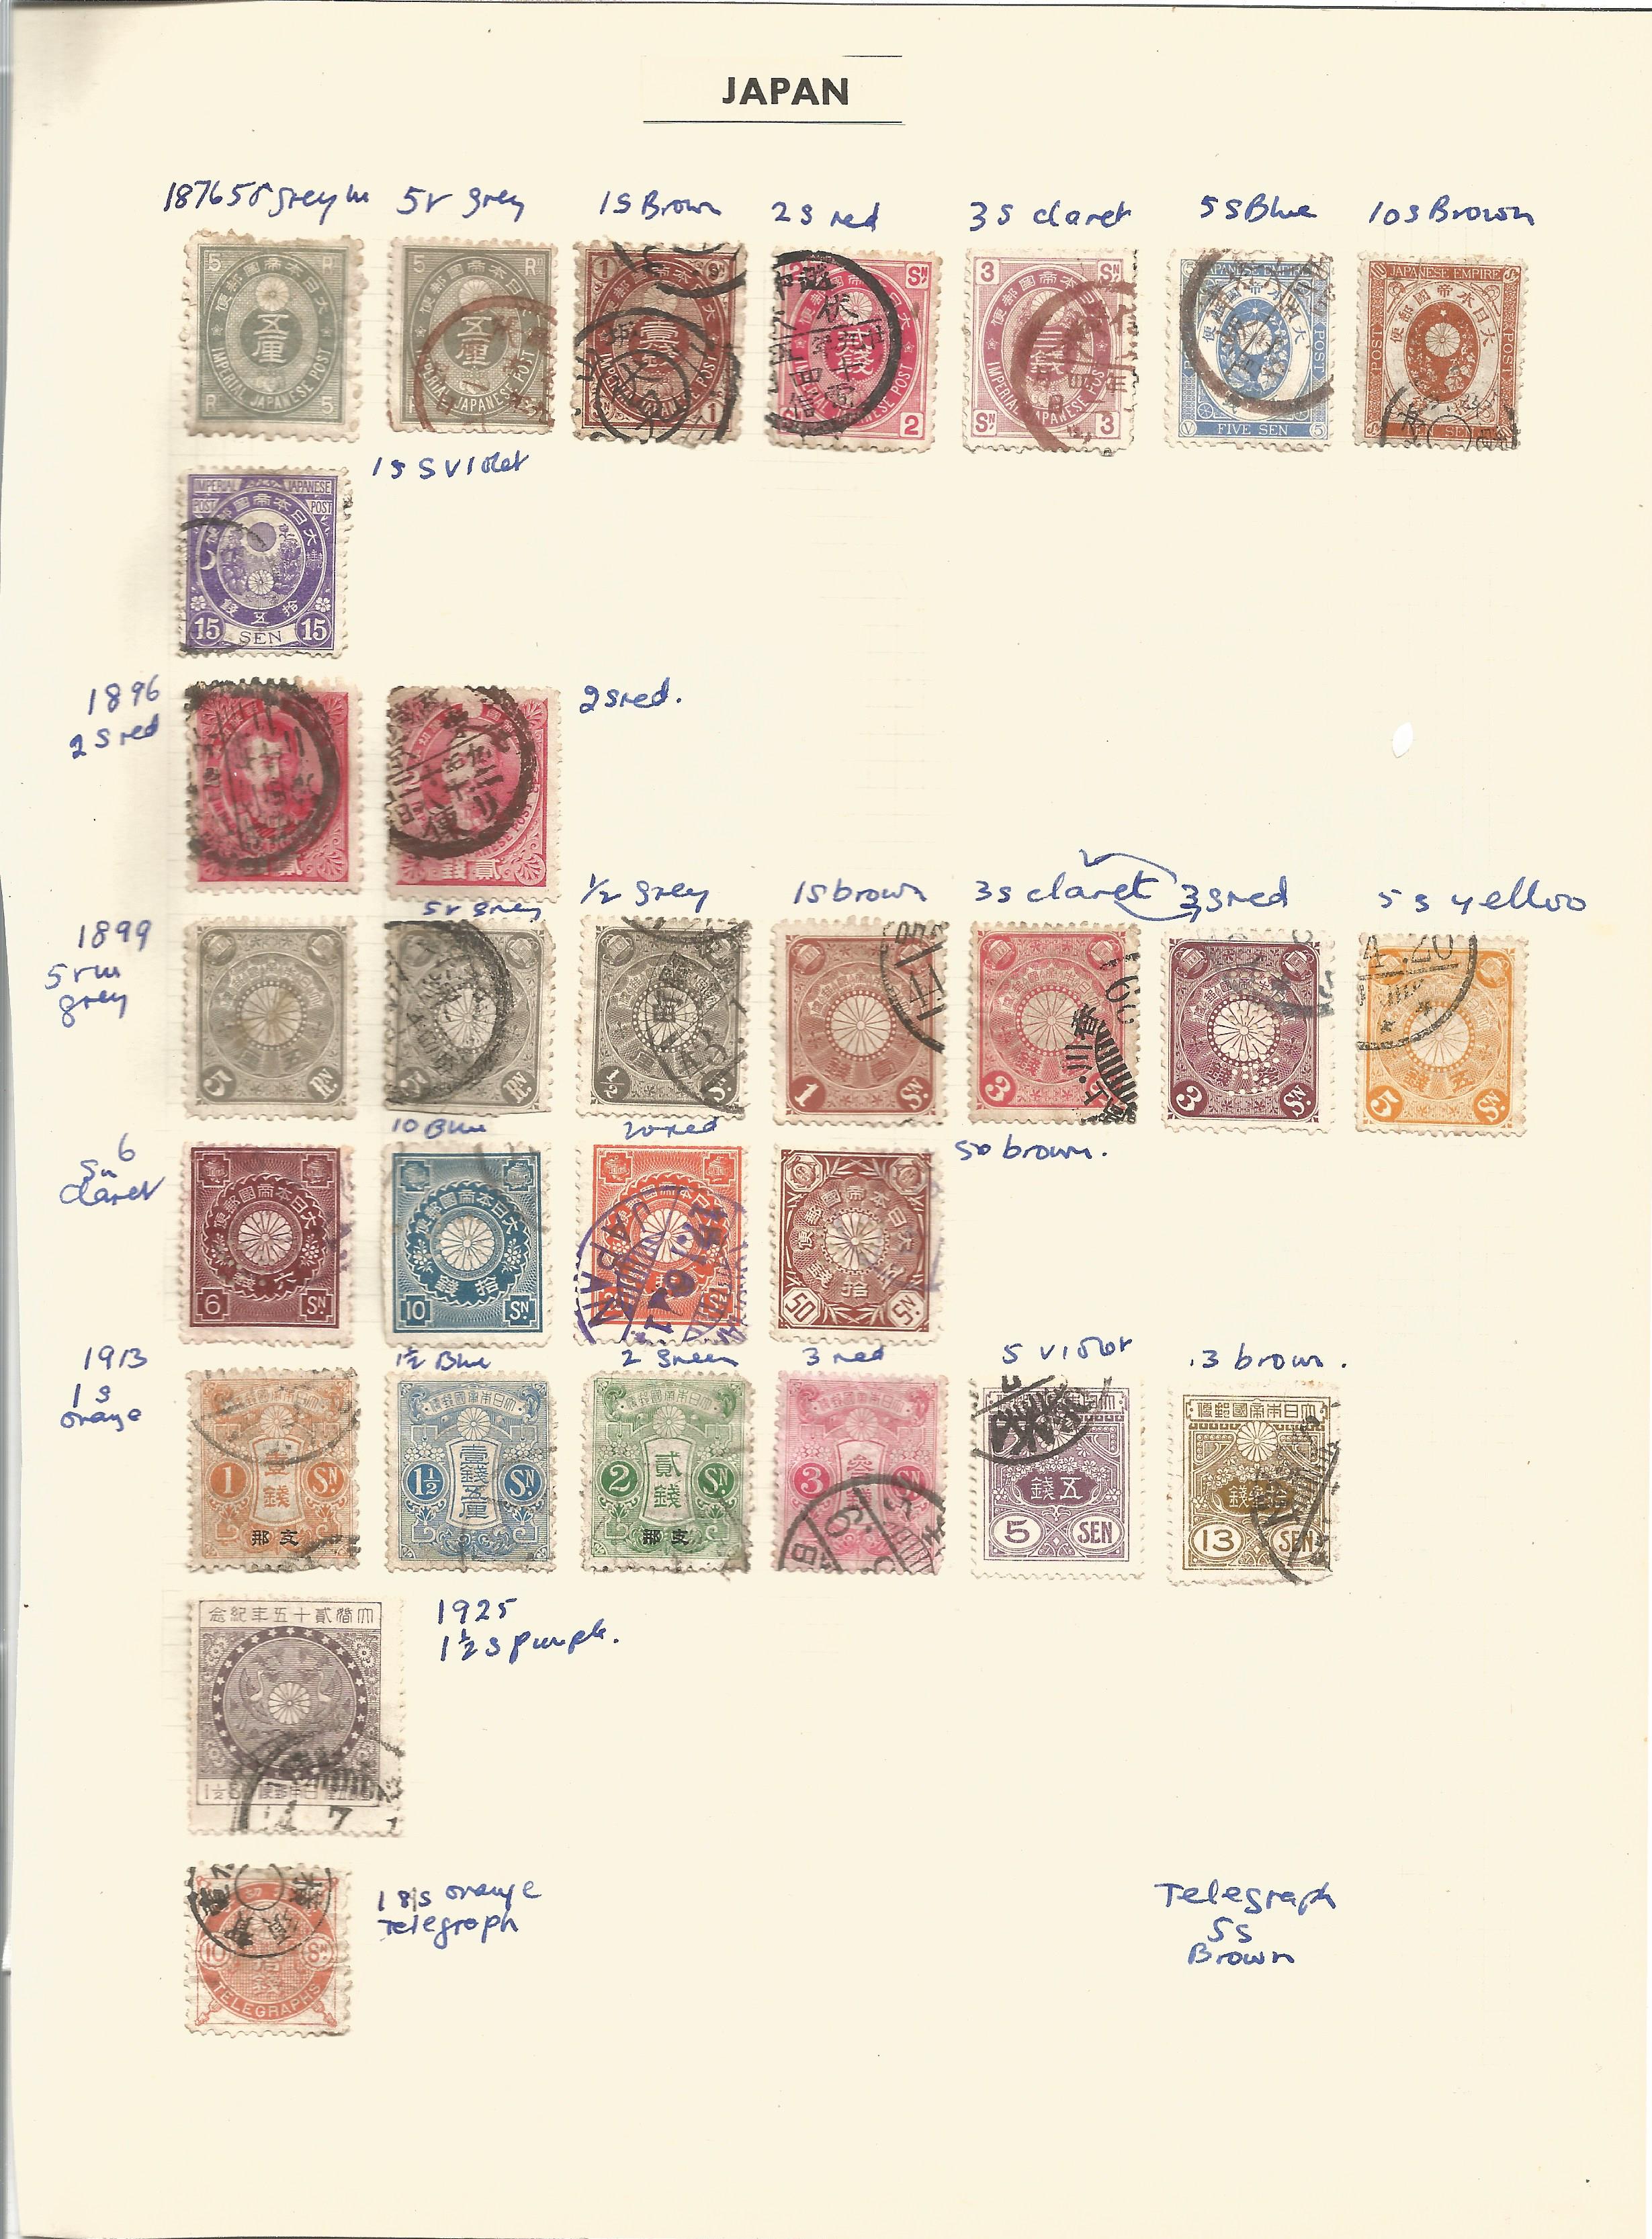 Japan, stamps on loose sheets, 1876/1976, approx. 30. Good condition. We combine postage on multiple